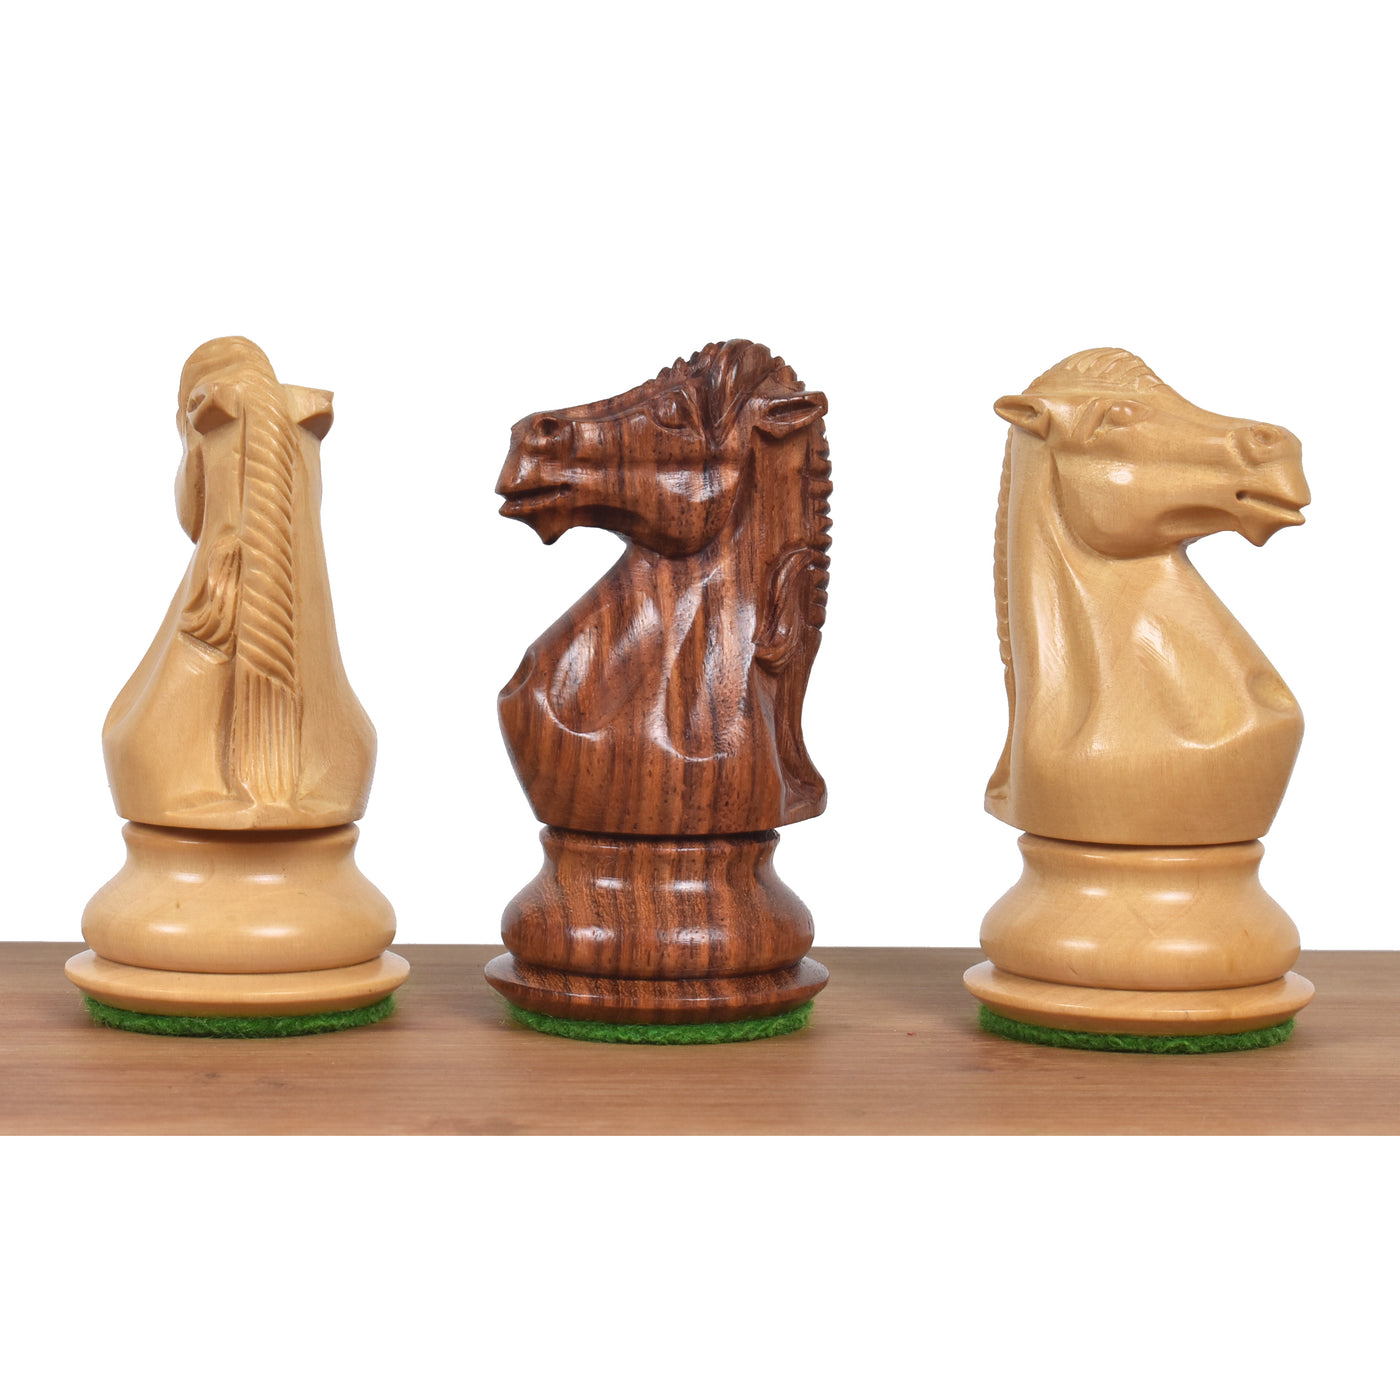 Royal Knight Staunton Chess Pieces Only set